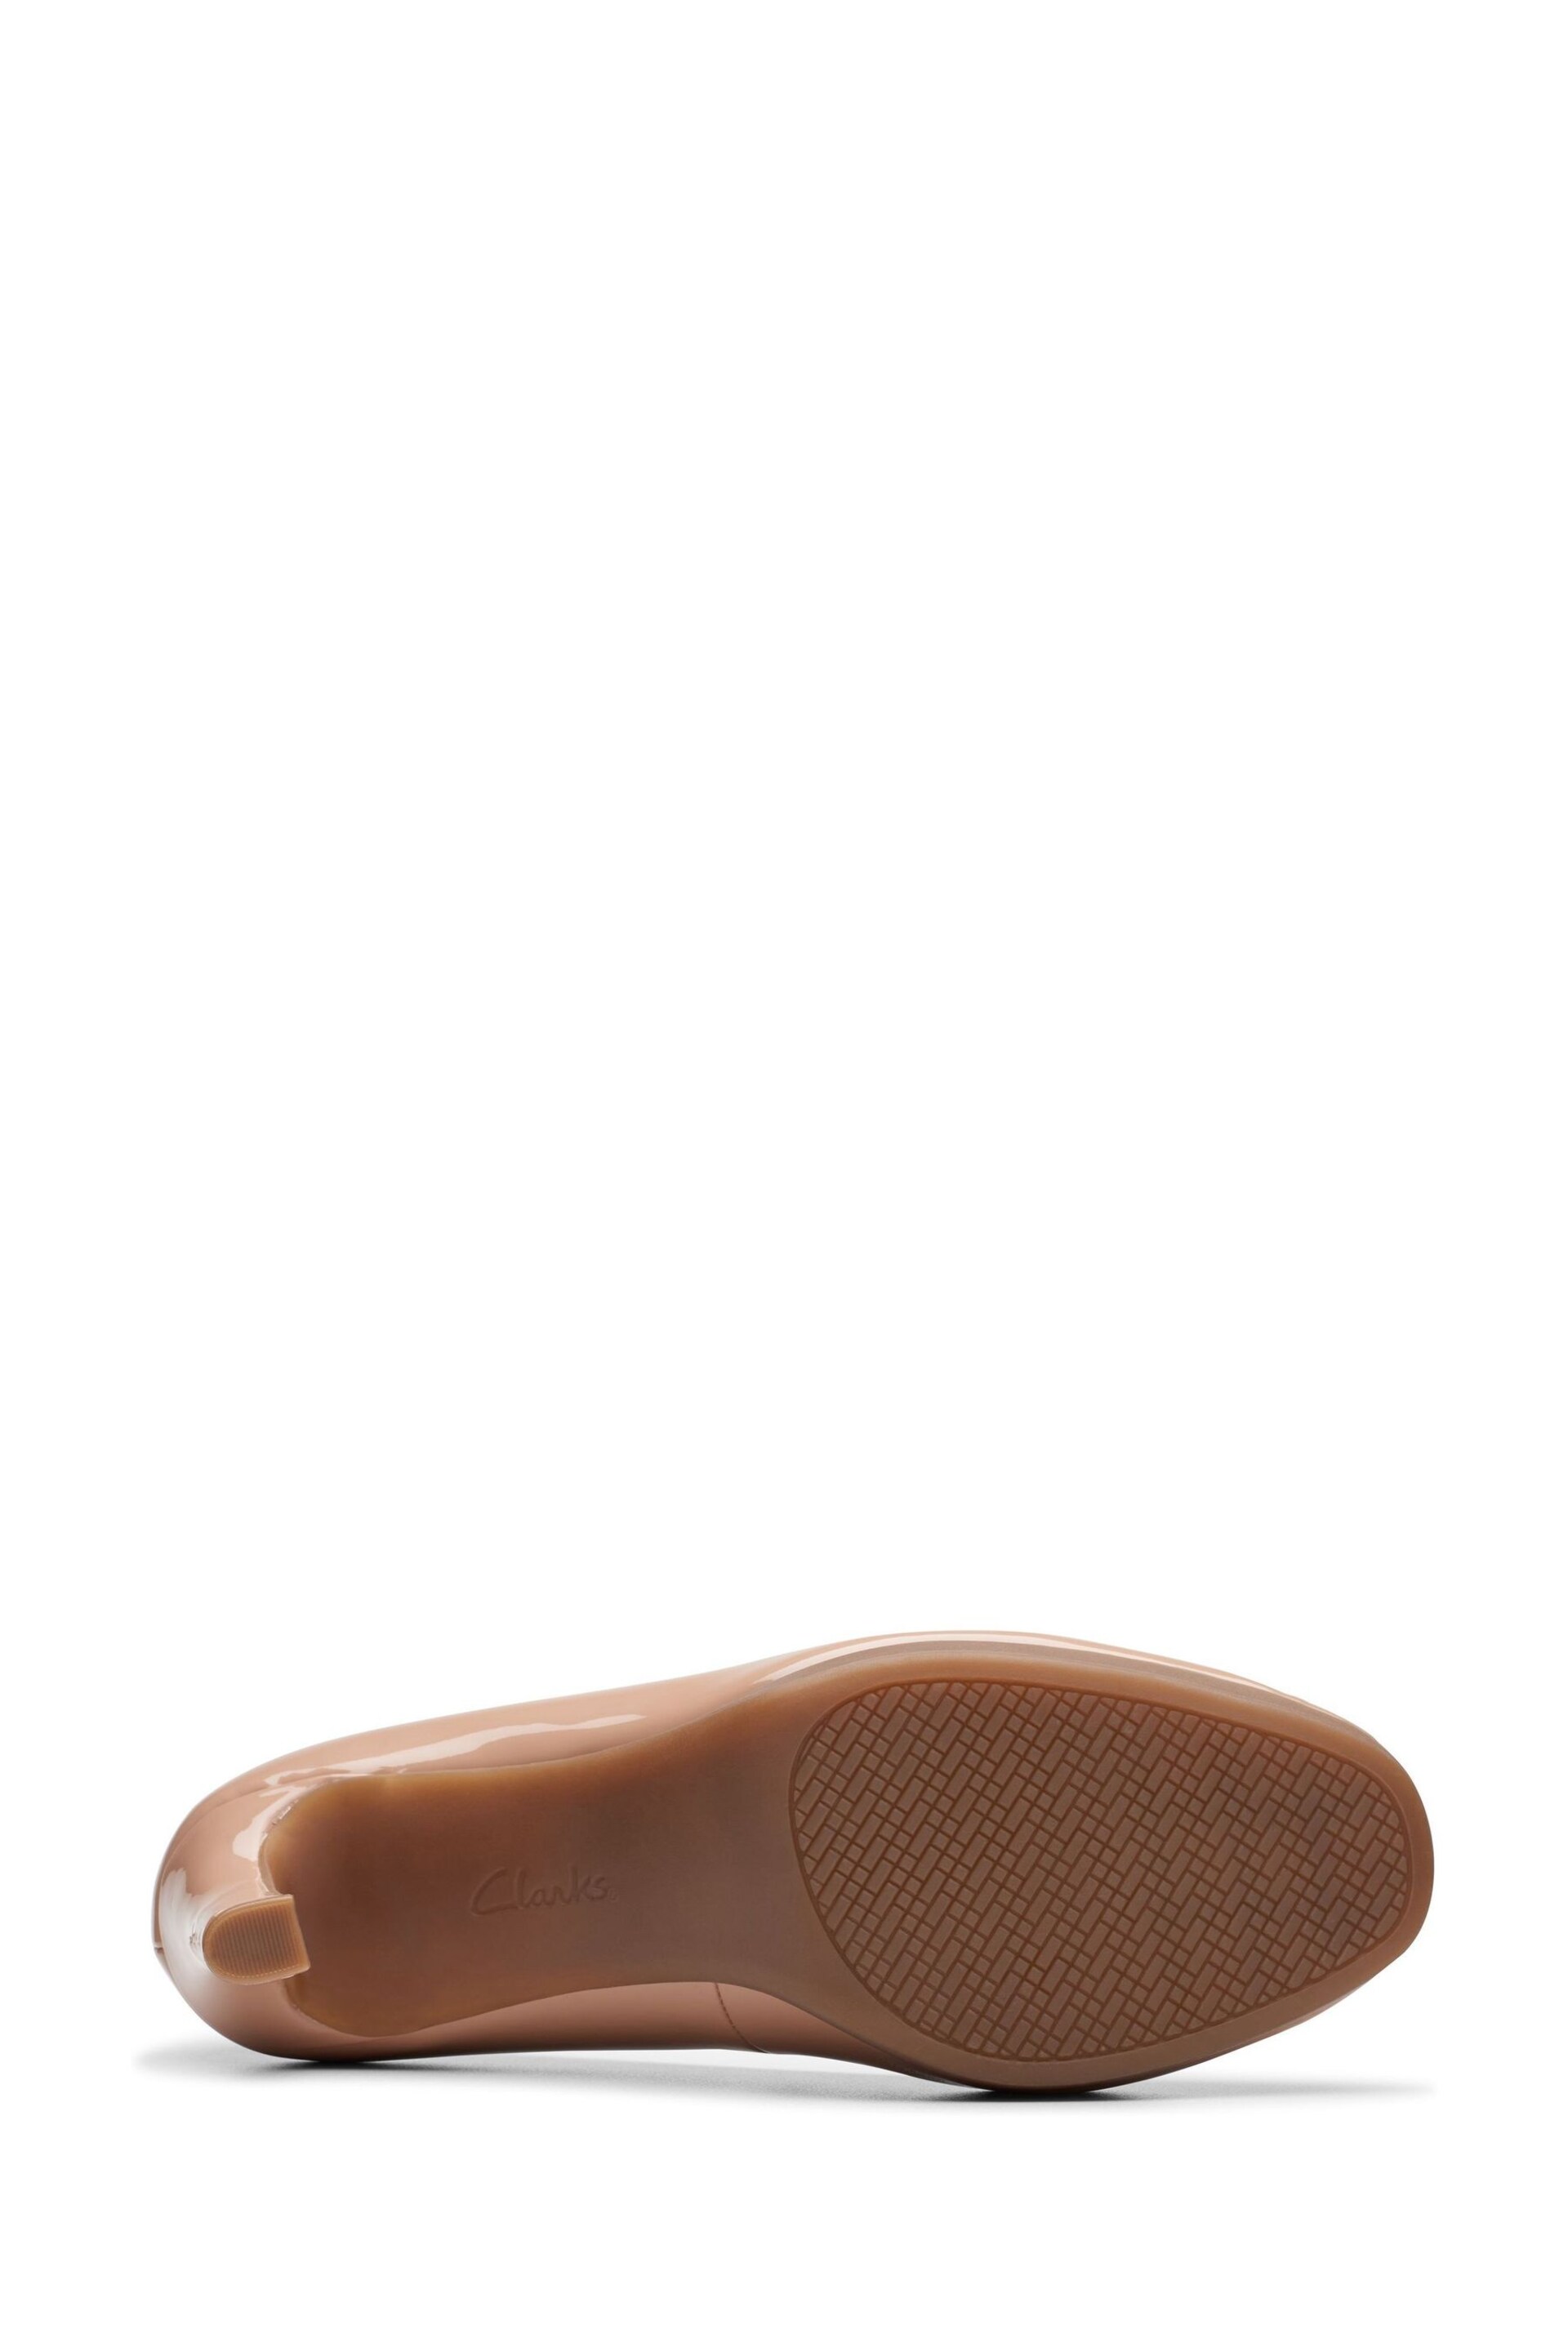 Clarks Nude Praline Patent Ambyr 2 Braley Shoes - Image 3 of 7